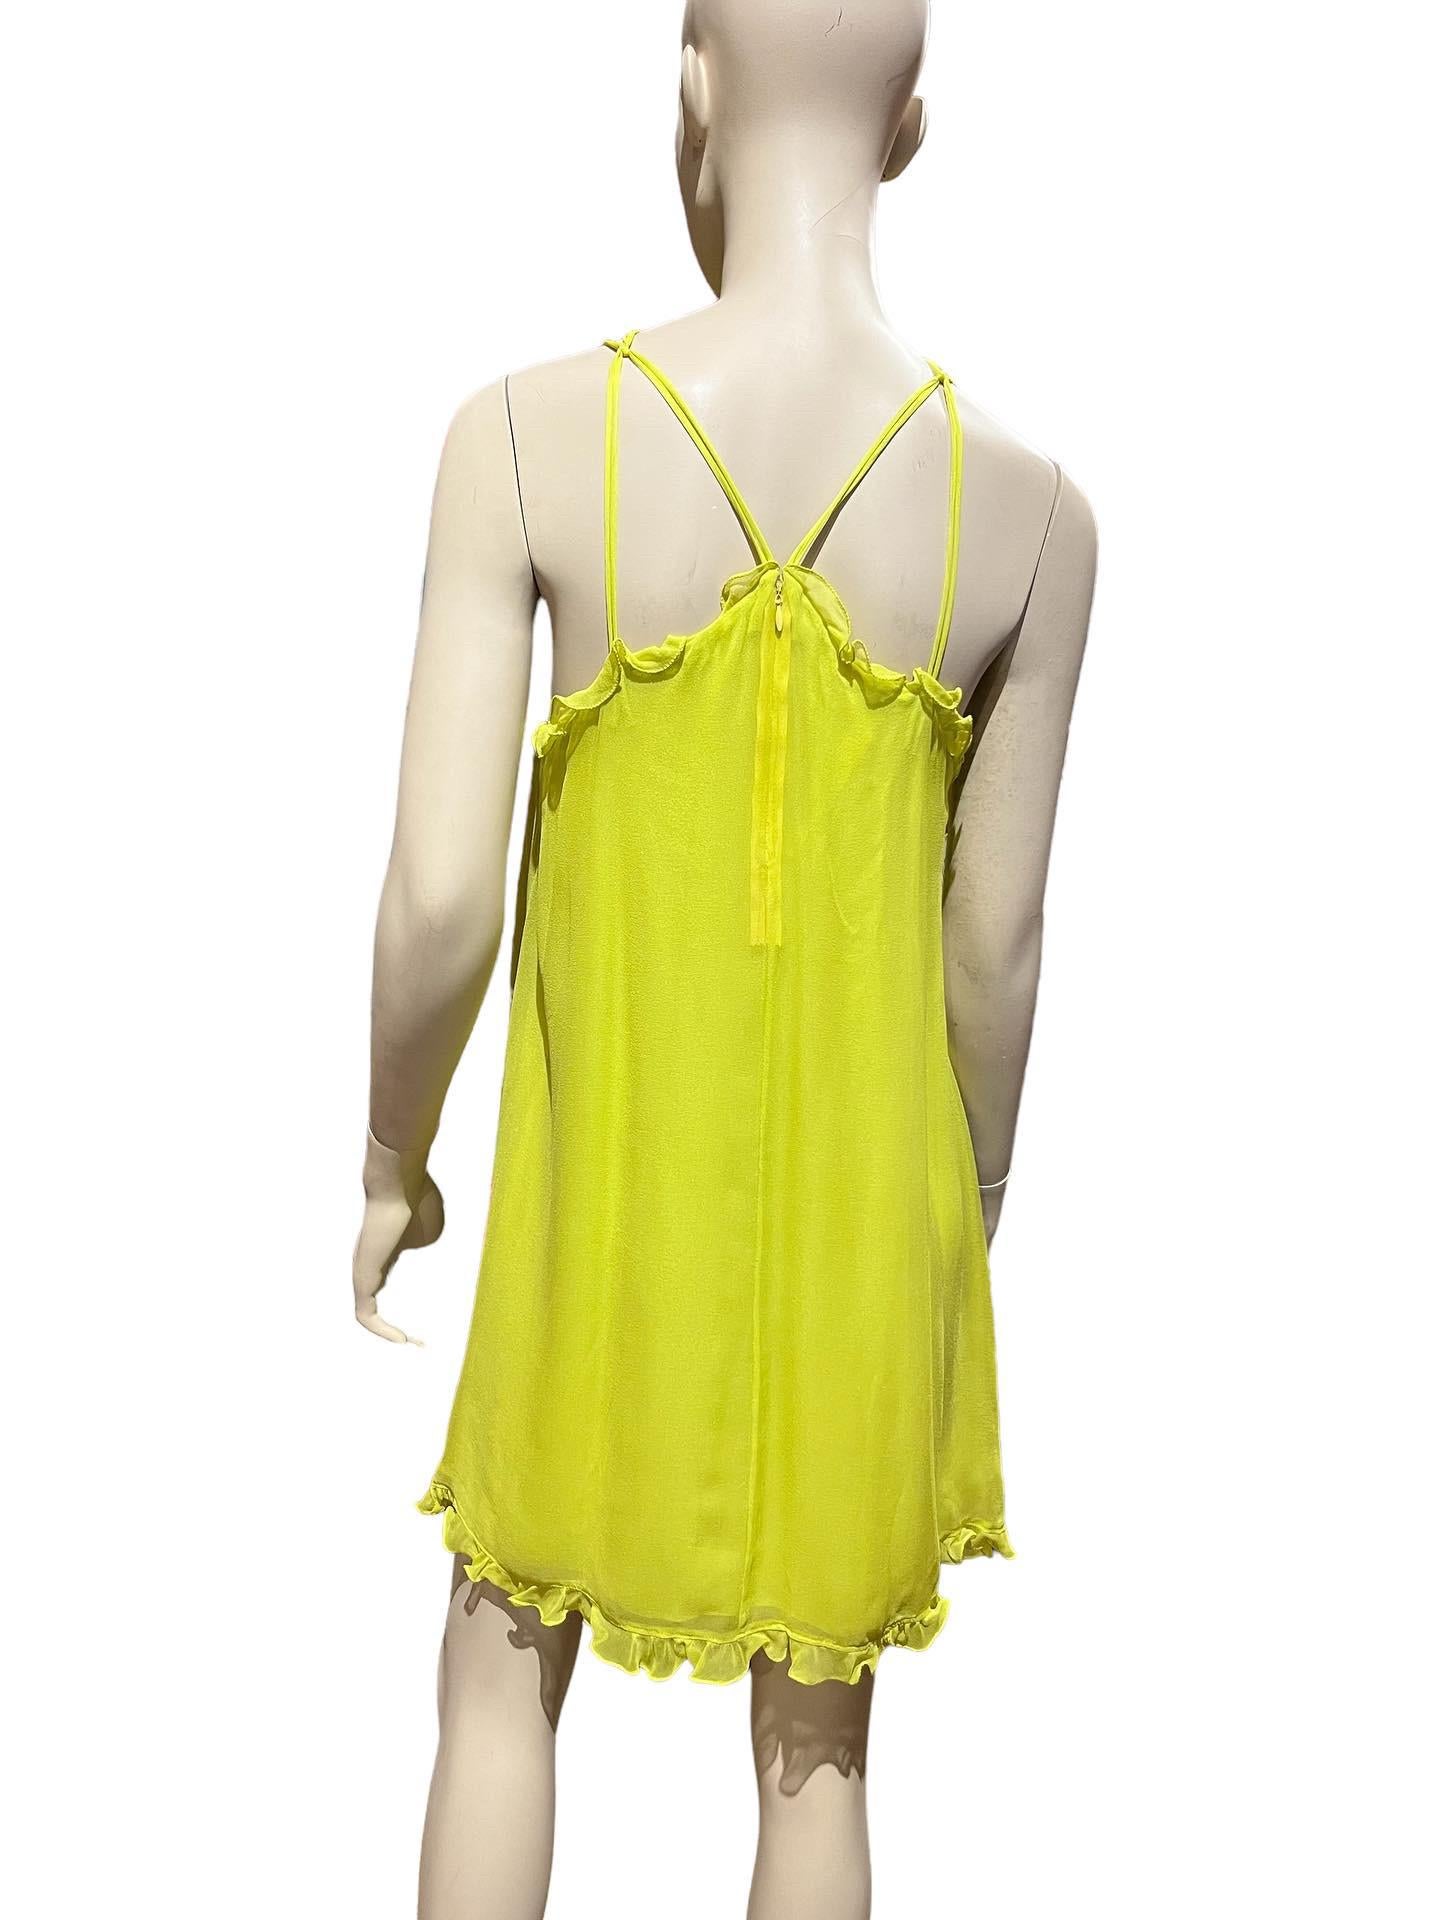 Y2k Stephen Burrows Incredible Neon Green Silk Chiffon Tent Dress with Ruffles In Good Condition For Sale In Greenport, NY